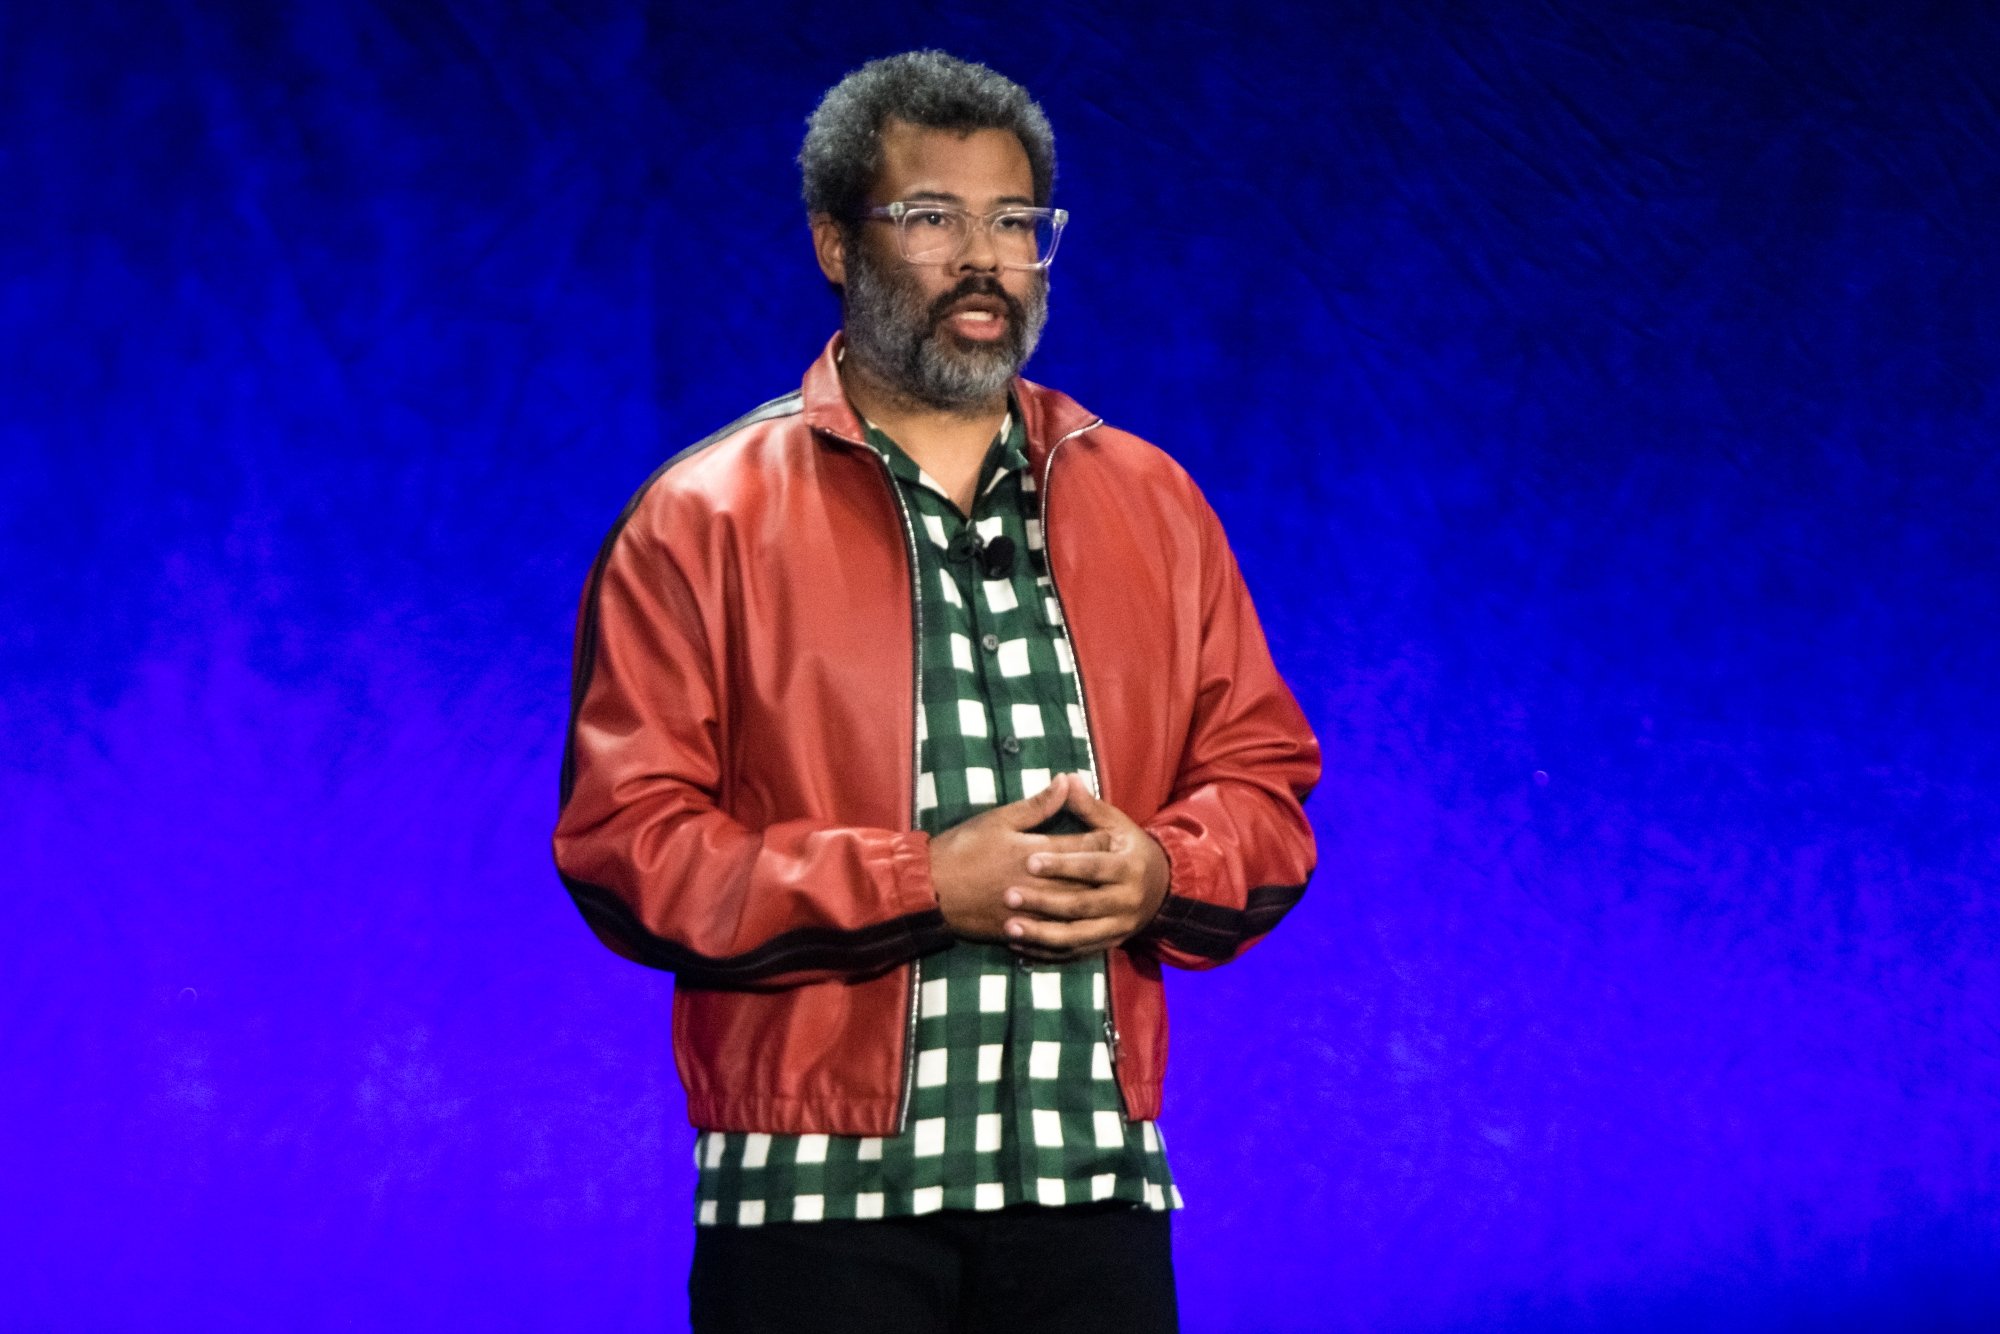 Jordan Peele 'Nope' wearing an red jacket with his hands crossed in front of him while standing in front of a blue background